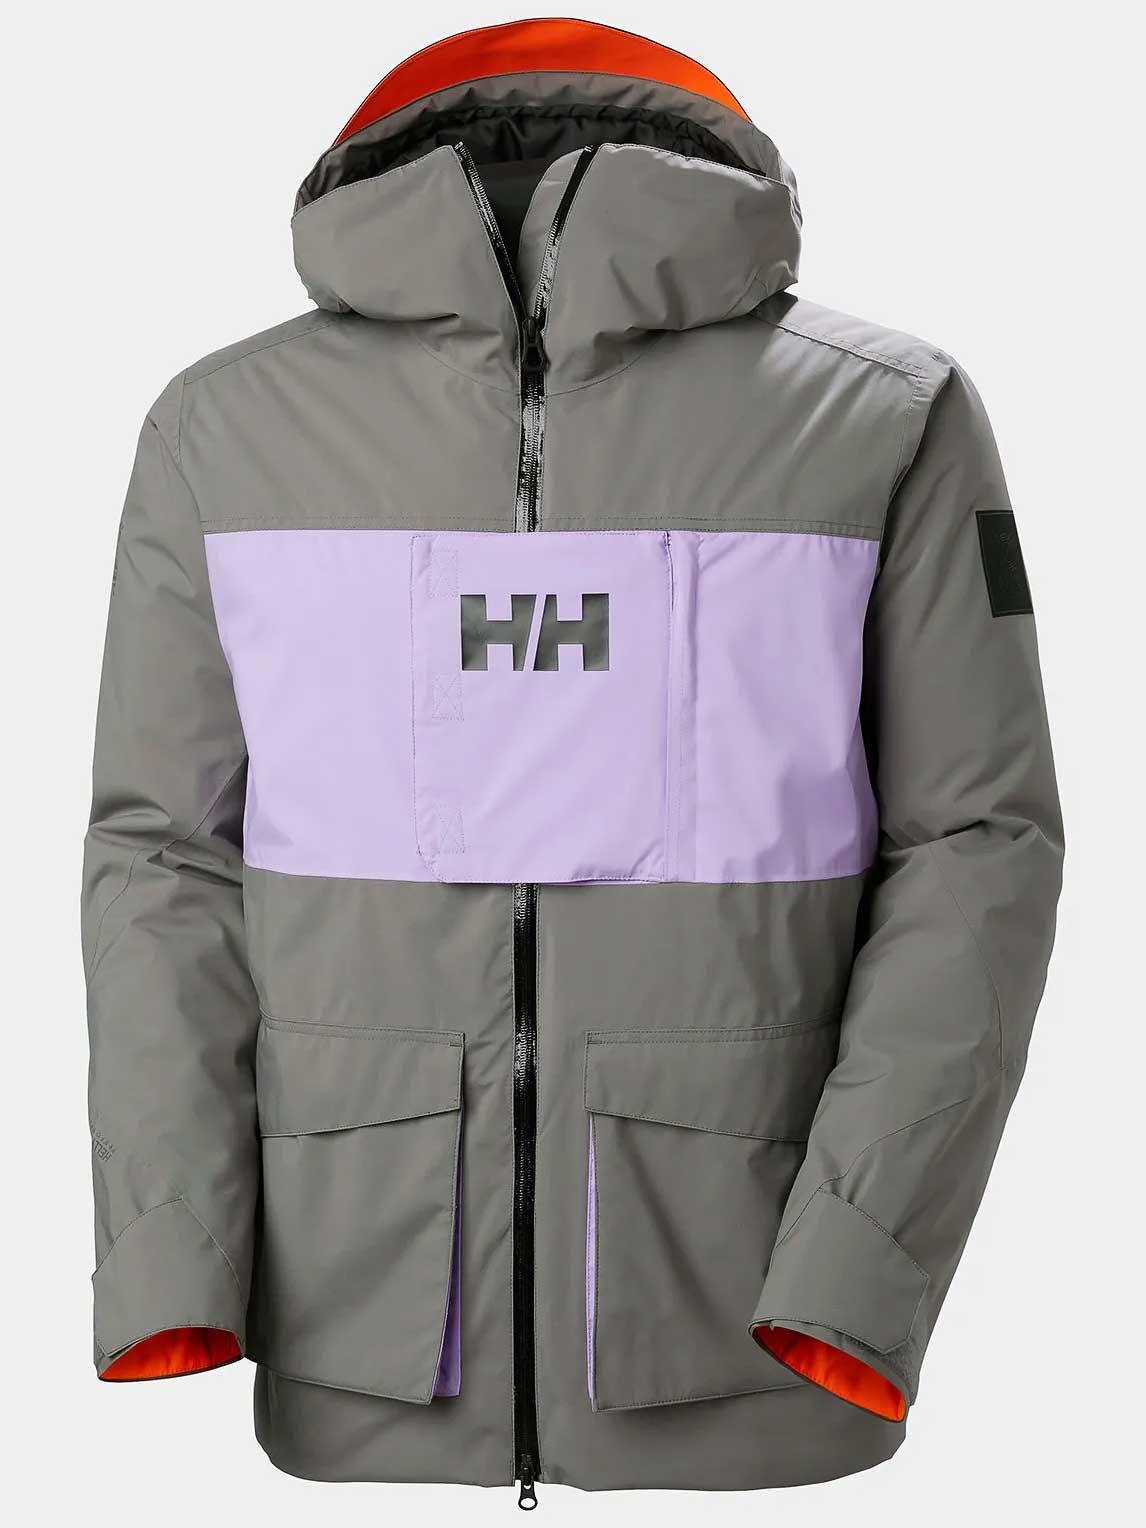 Selected image for HELLY HANSEN Muška ski jakna Ullr D Insulated HH-65877 siva